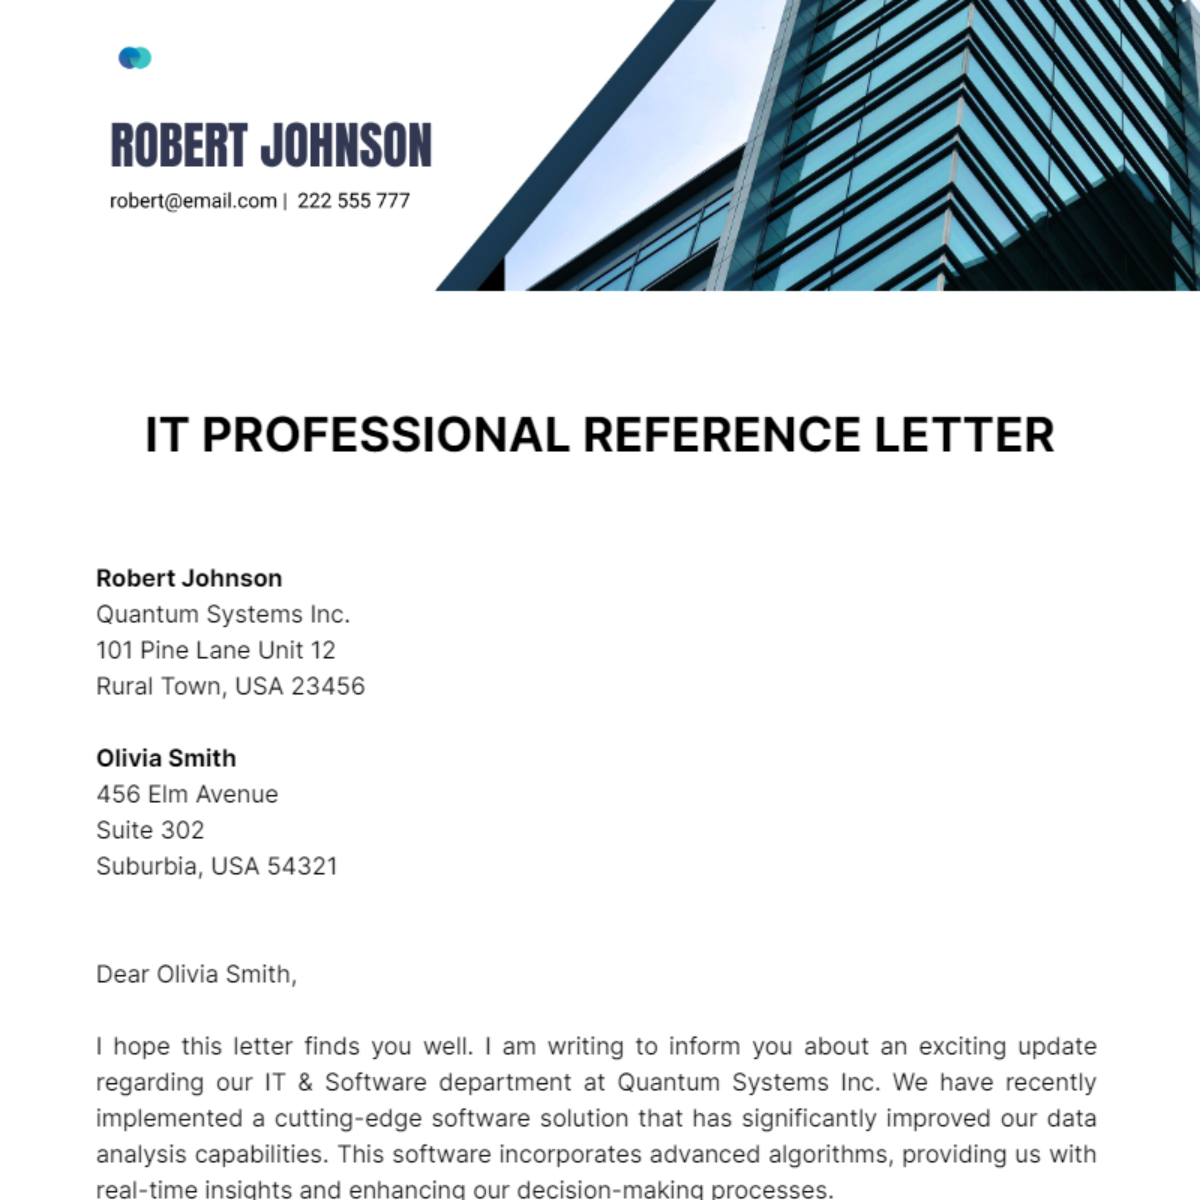 IT Professional Reference Letter Template